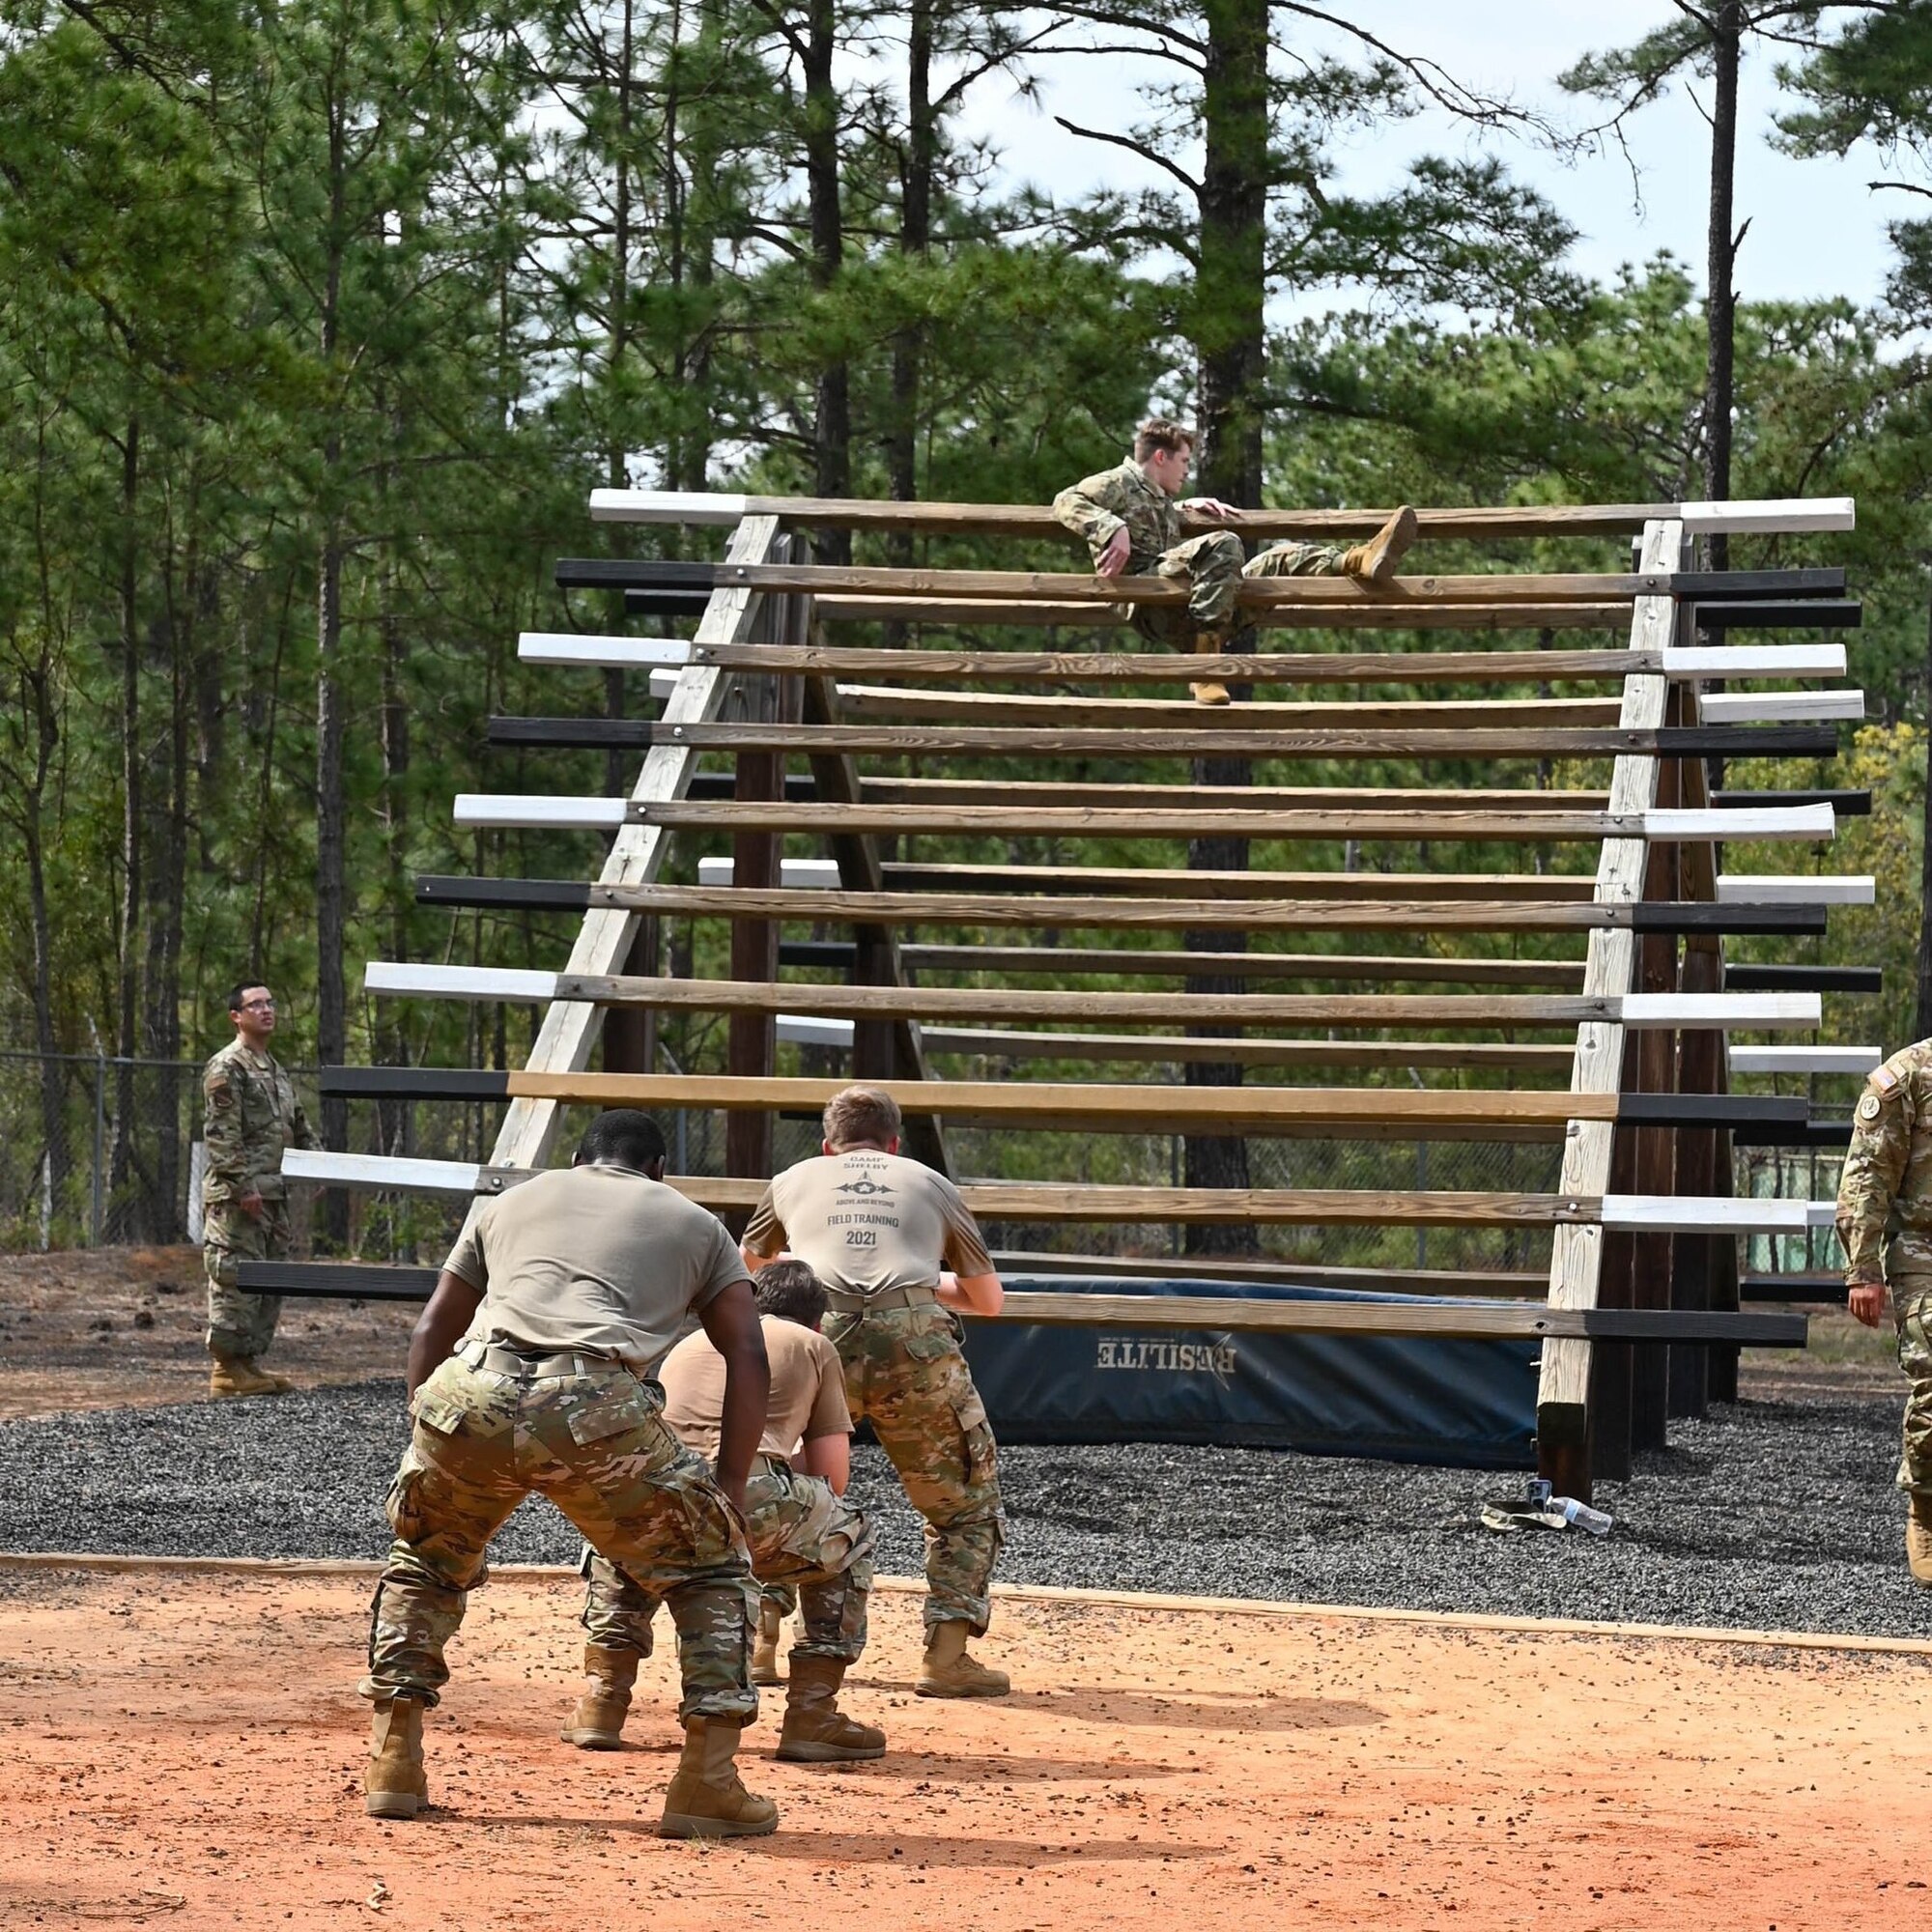 Cadets attempt Obstacle Course at Pope AAF in preparation for their Cadet Field training.